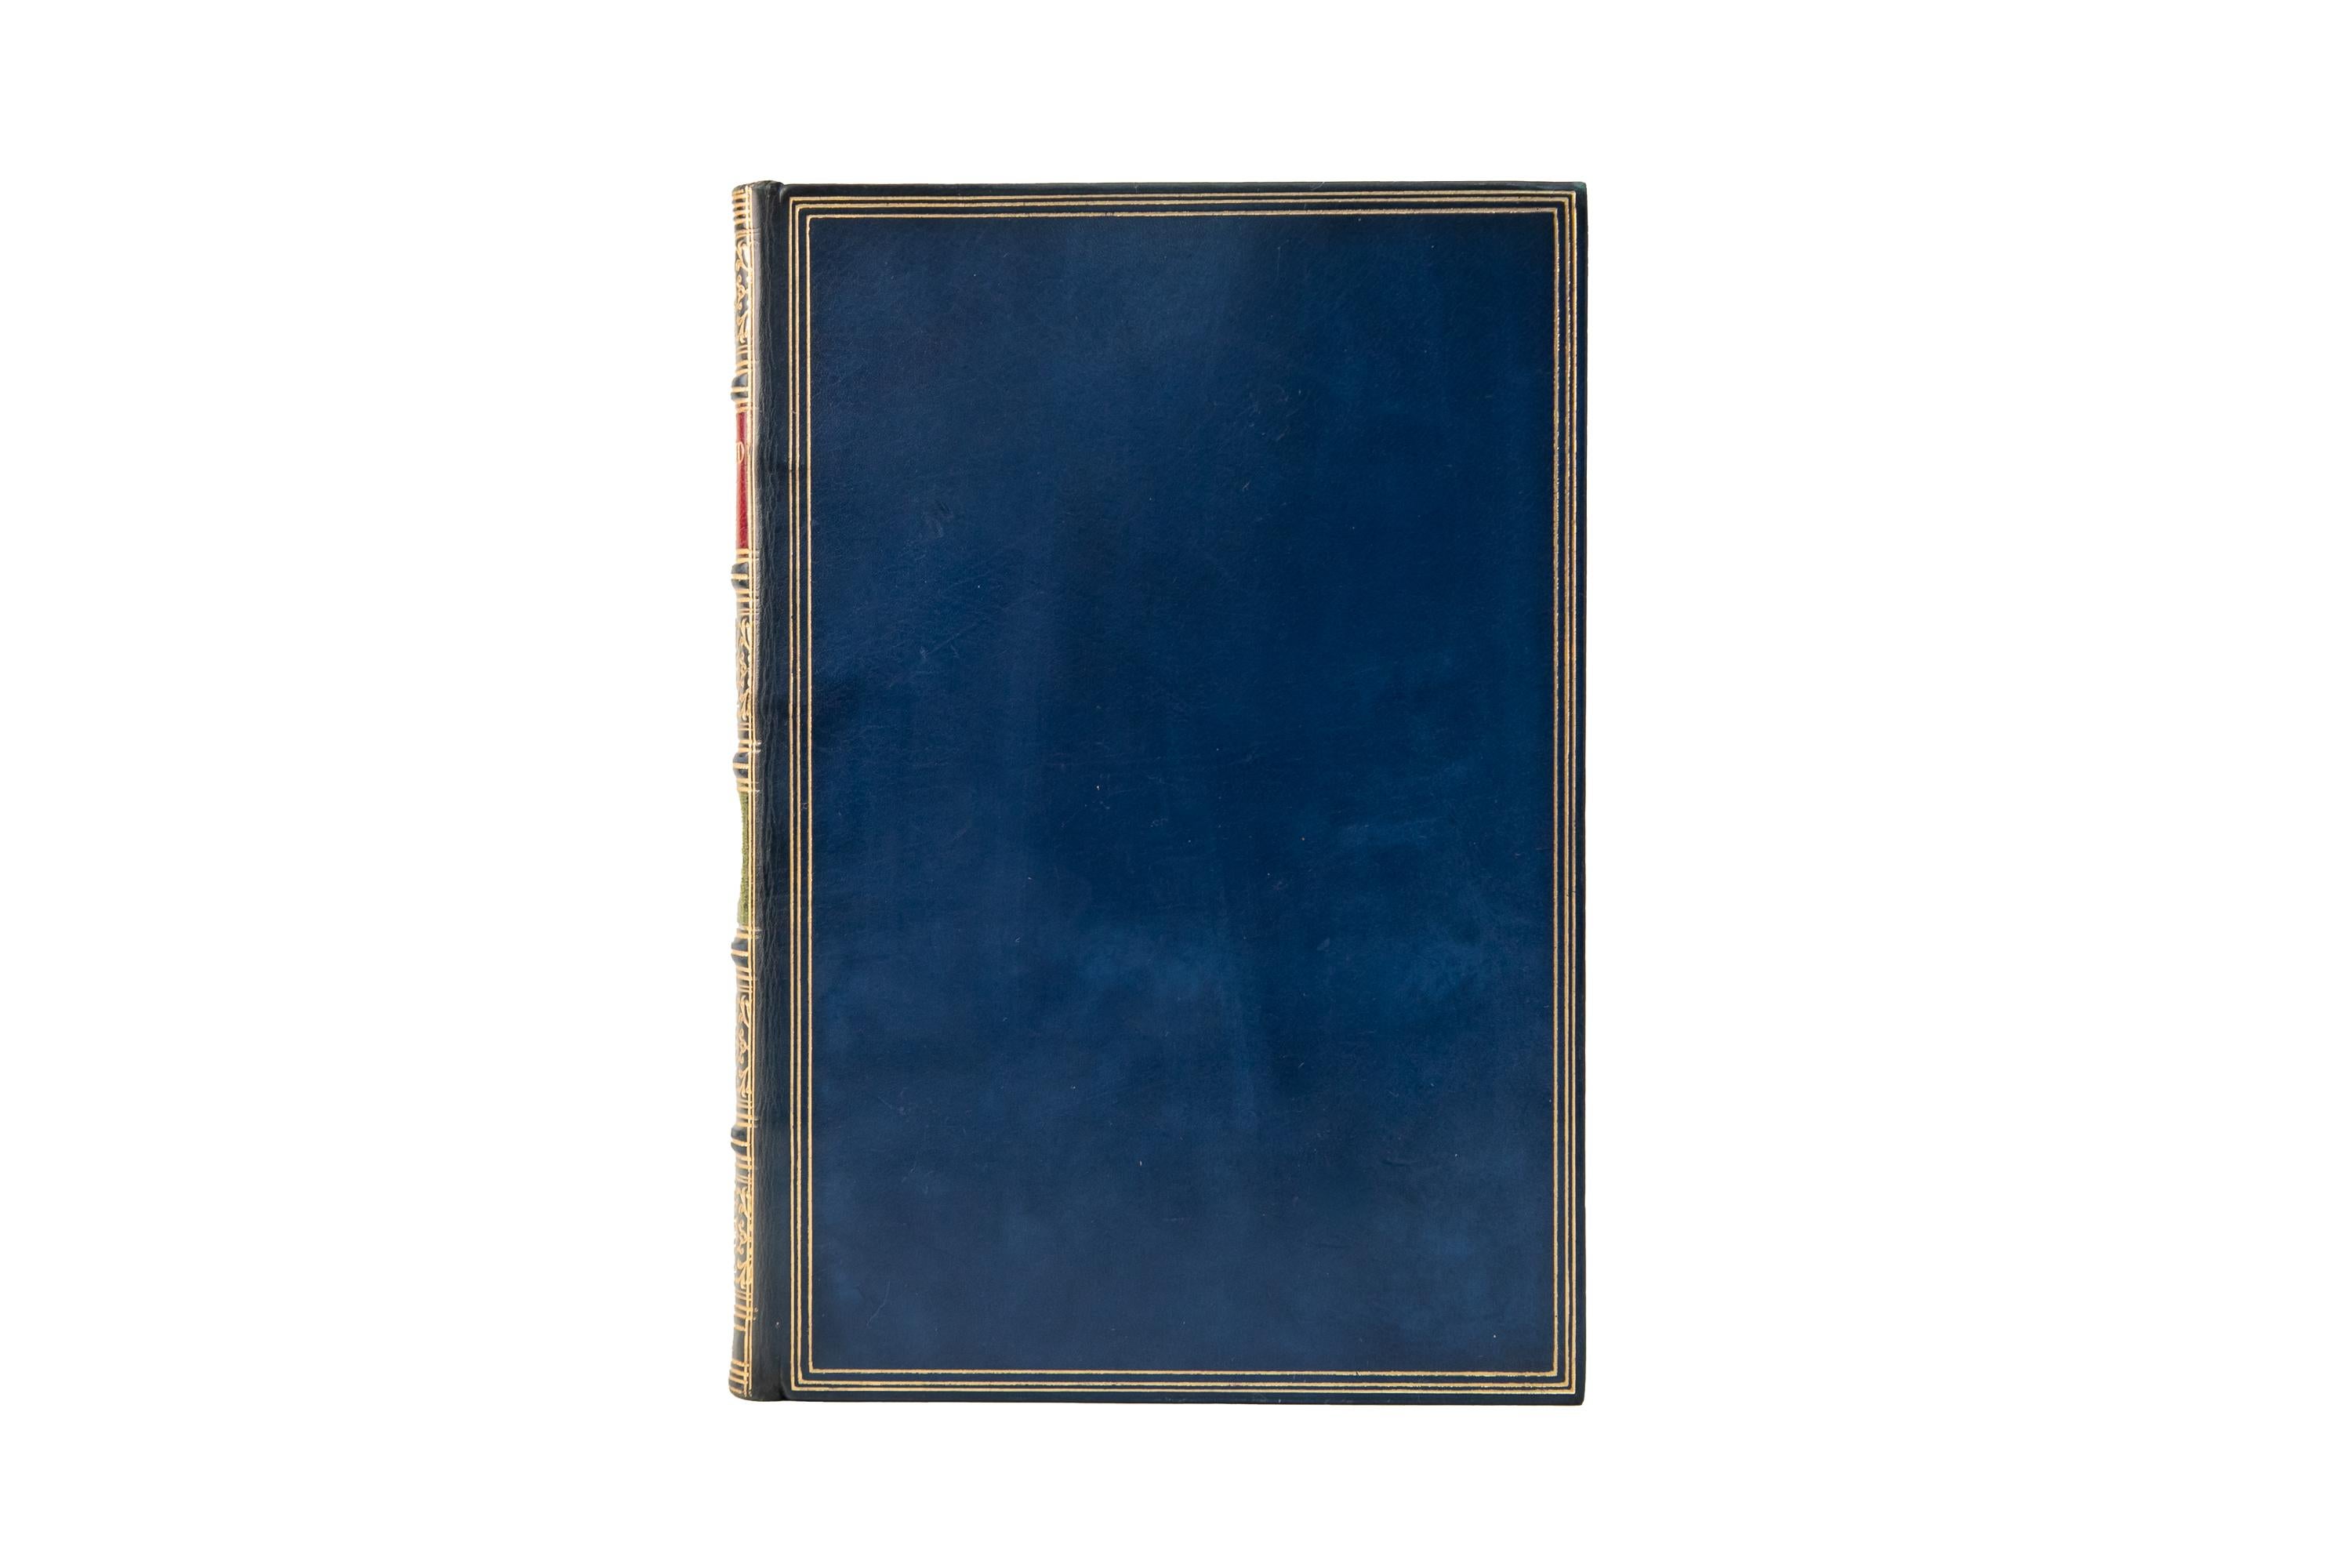 1 Volume. Robert Frost, Collected Poems. Bound by Riviere & Son in full blue calf with a gilt-tooled border on the cover. Raised band spine with gilt-tooled detailing and red and green morocco labels. All edges gilt, gilt-tooled dentelles, and